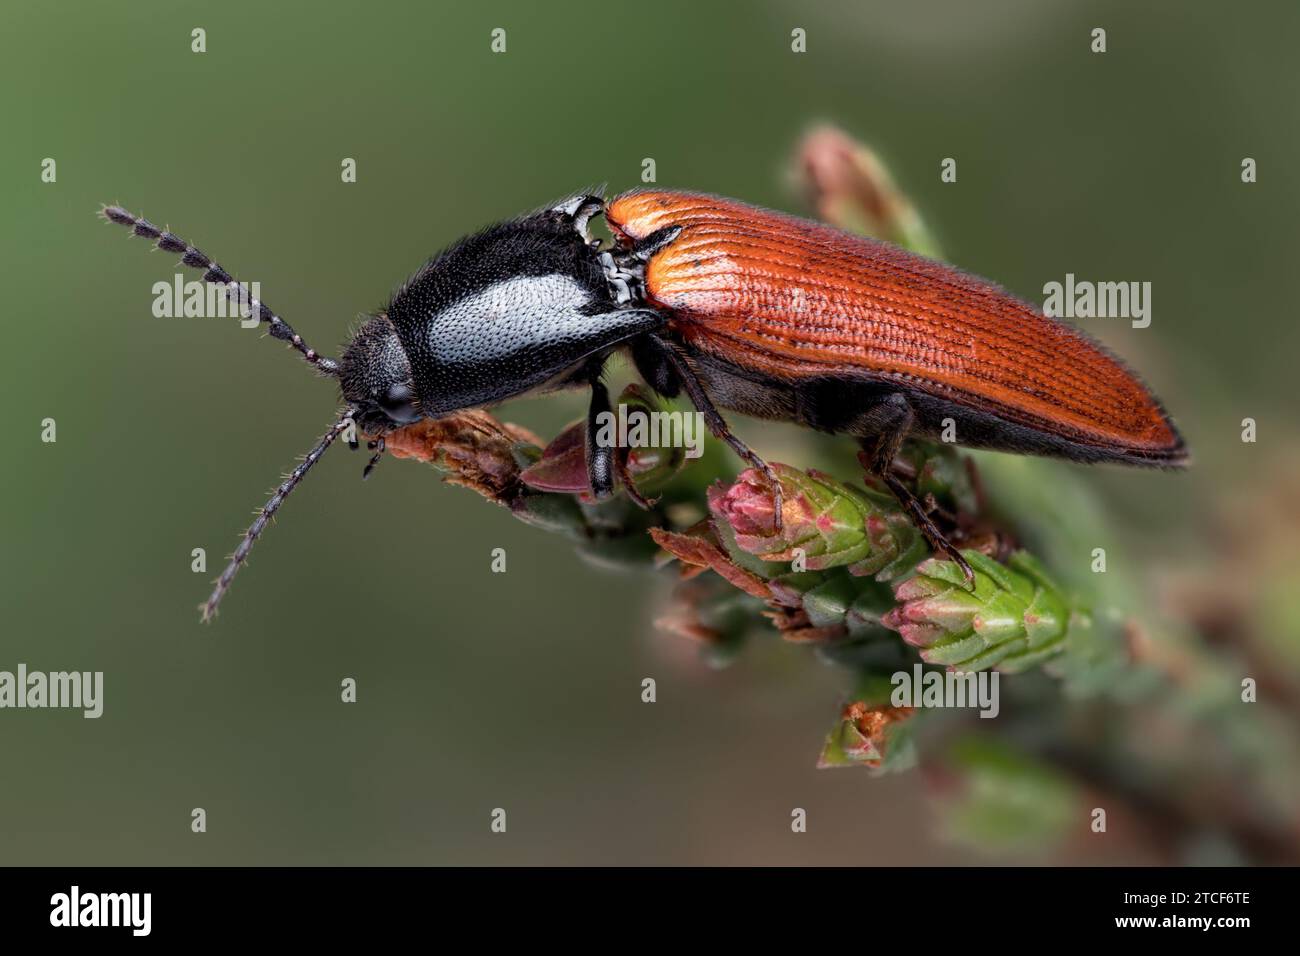 Ampedus pomorum click beetle perched on heather. Tipperary, Ireland Stock Photo